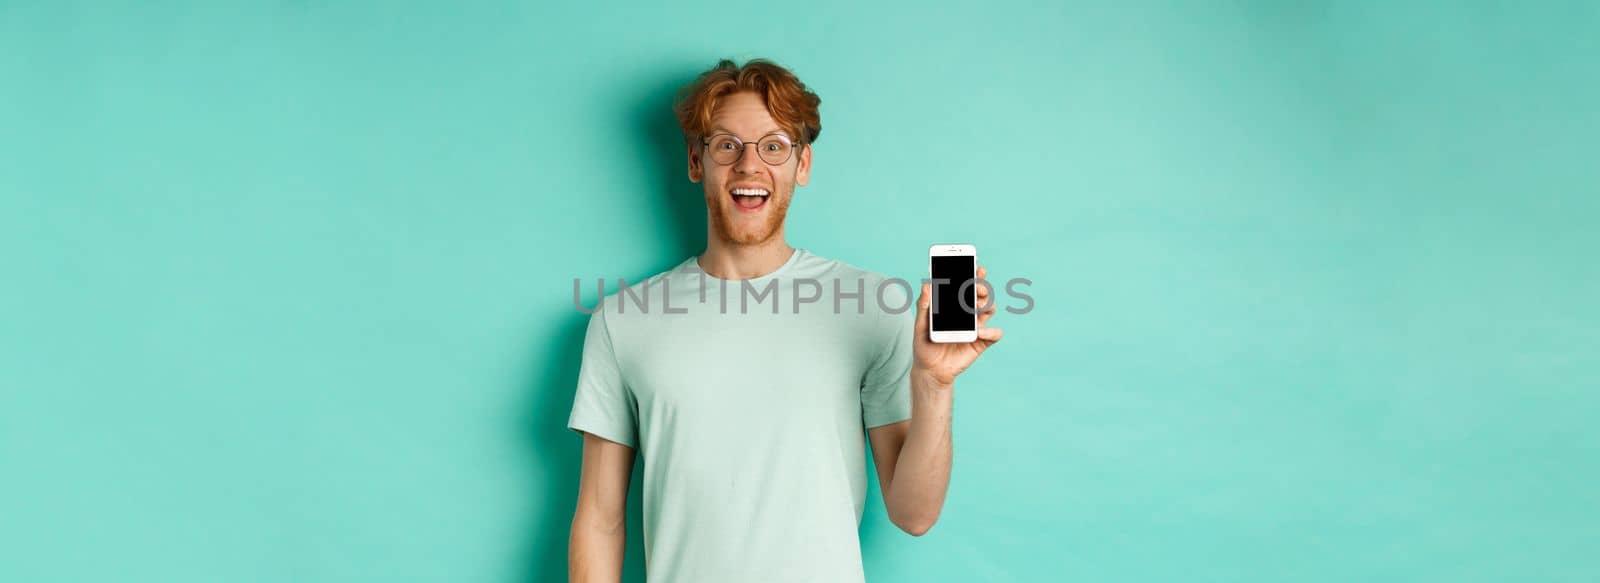 Online shopping. Cheerful redhead man in glasses and t-shirt showing smartphone screen and smiling, standing over mint background.